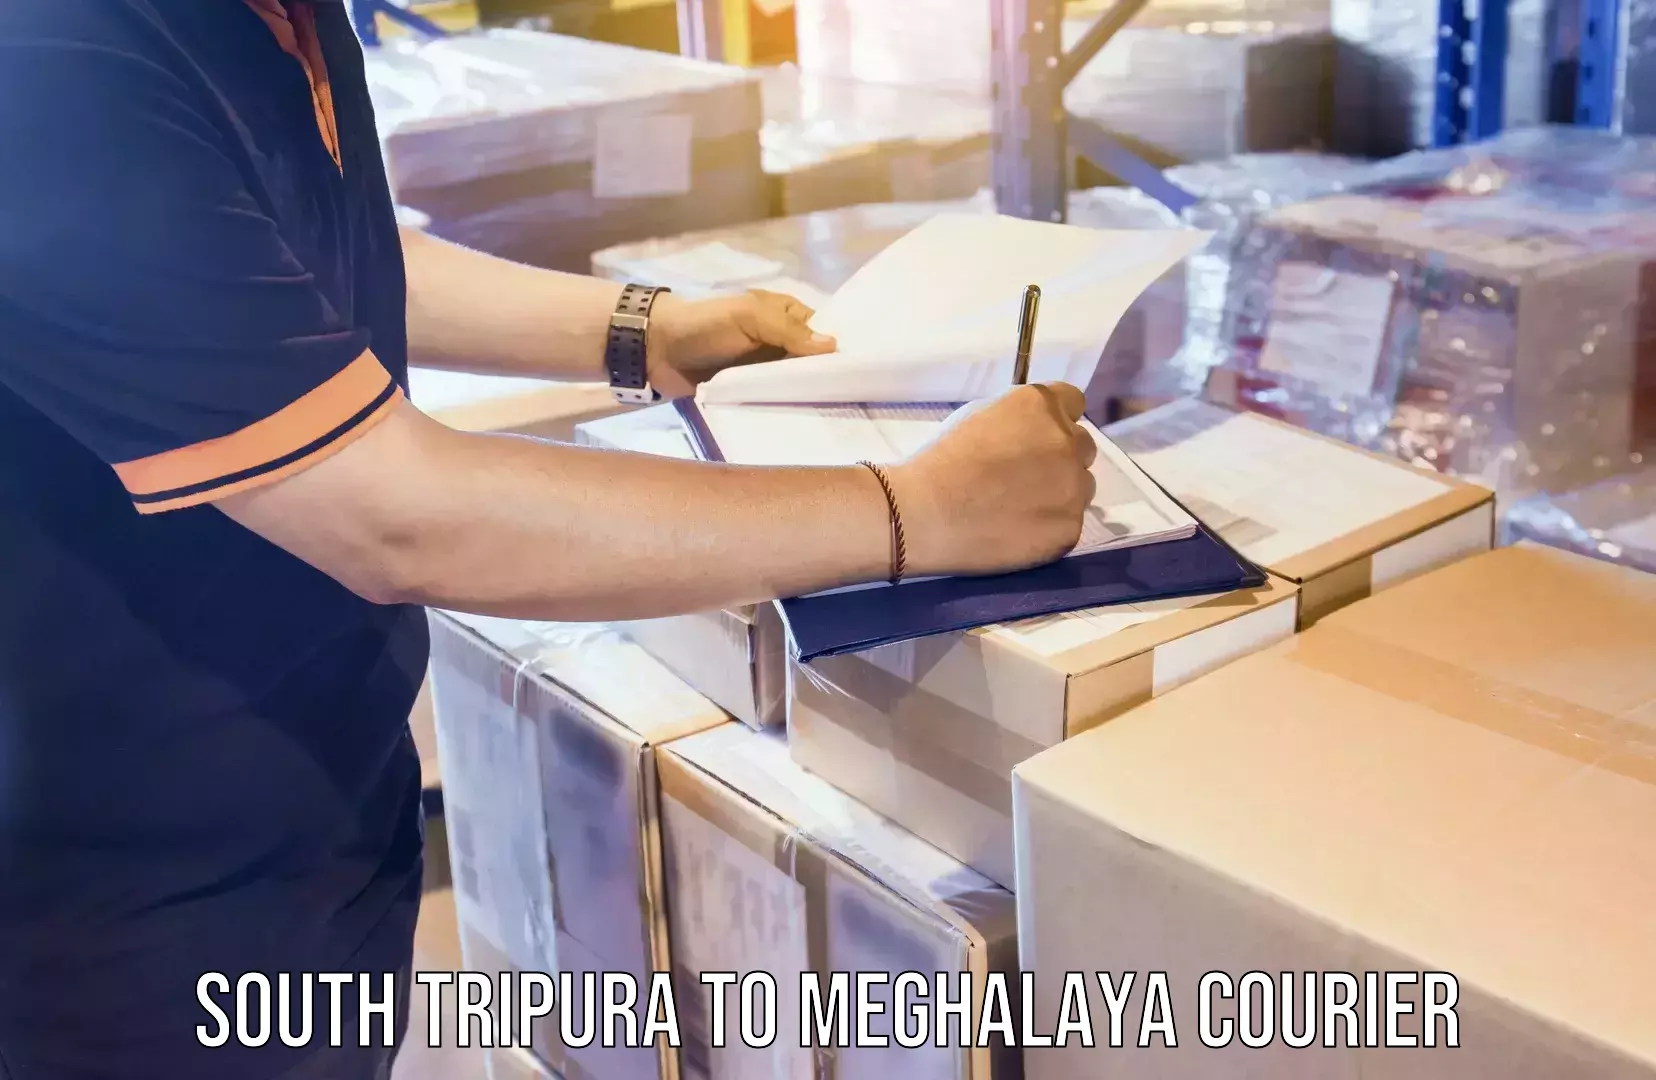 Advanced courier platforms in South Tripura to Meghalaya